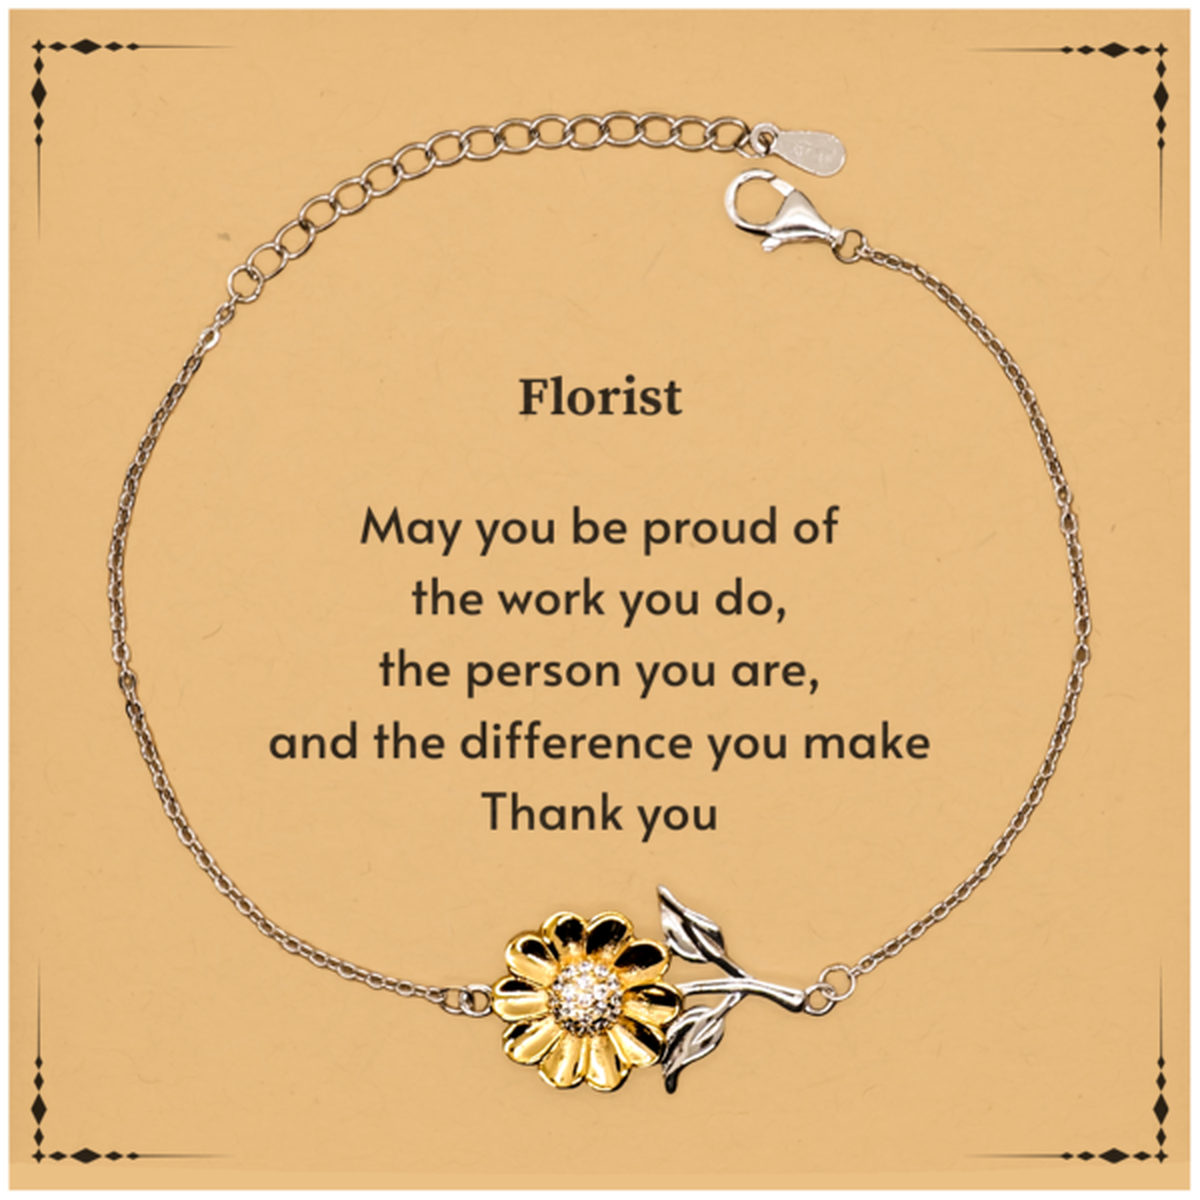 Heartwarming Sunflower Bracelet Retirement Coworkers Gifts for Florist, Florist May You be proud of the work you do, the person you are Gifts for Boss Men Women Friends